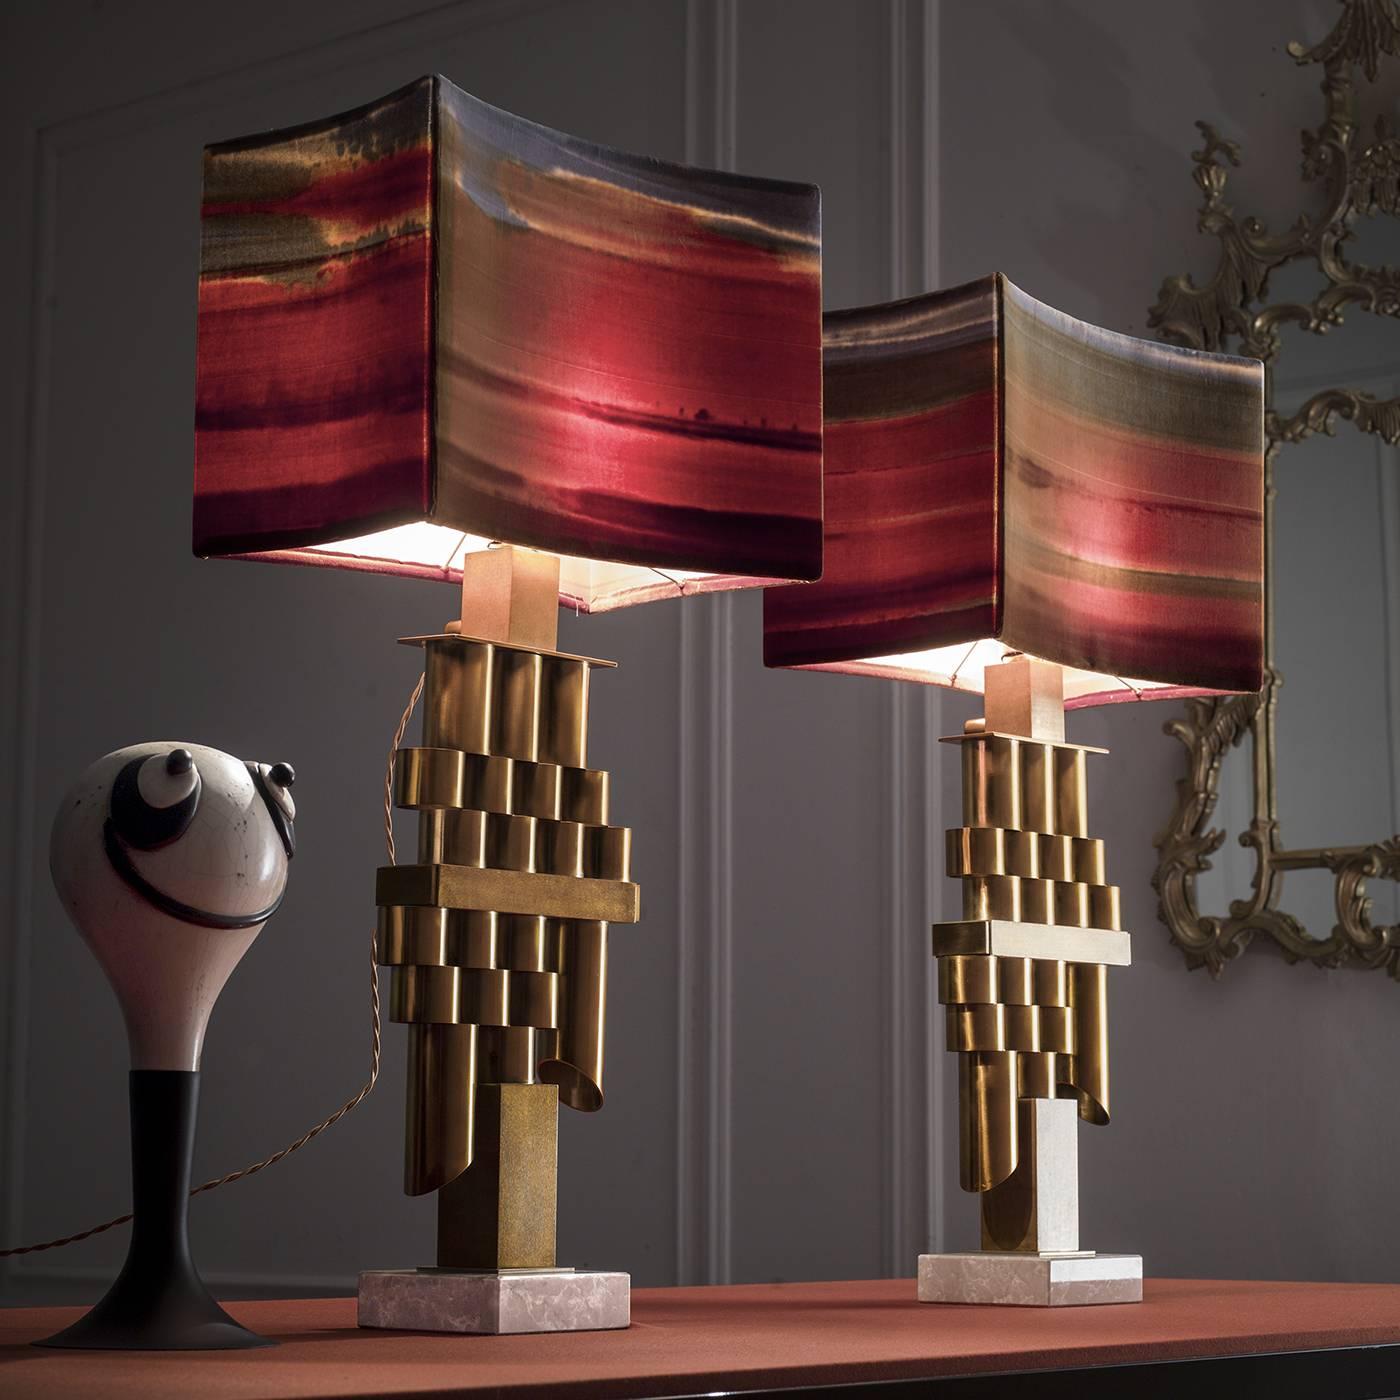 This lamp will be a striking accent when placed on a desk in the home or in an office. It can also be paired with a twin to create a double piece on either end of a large table. Its central structure, crafted using multiple tubular elements